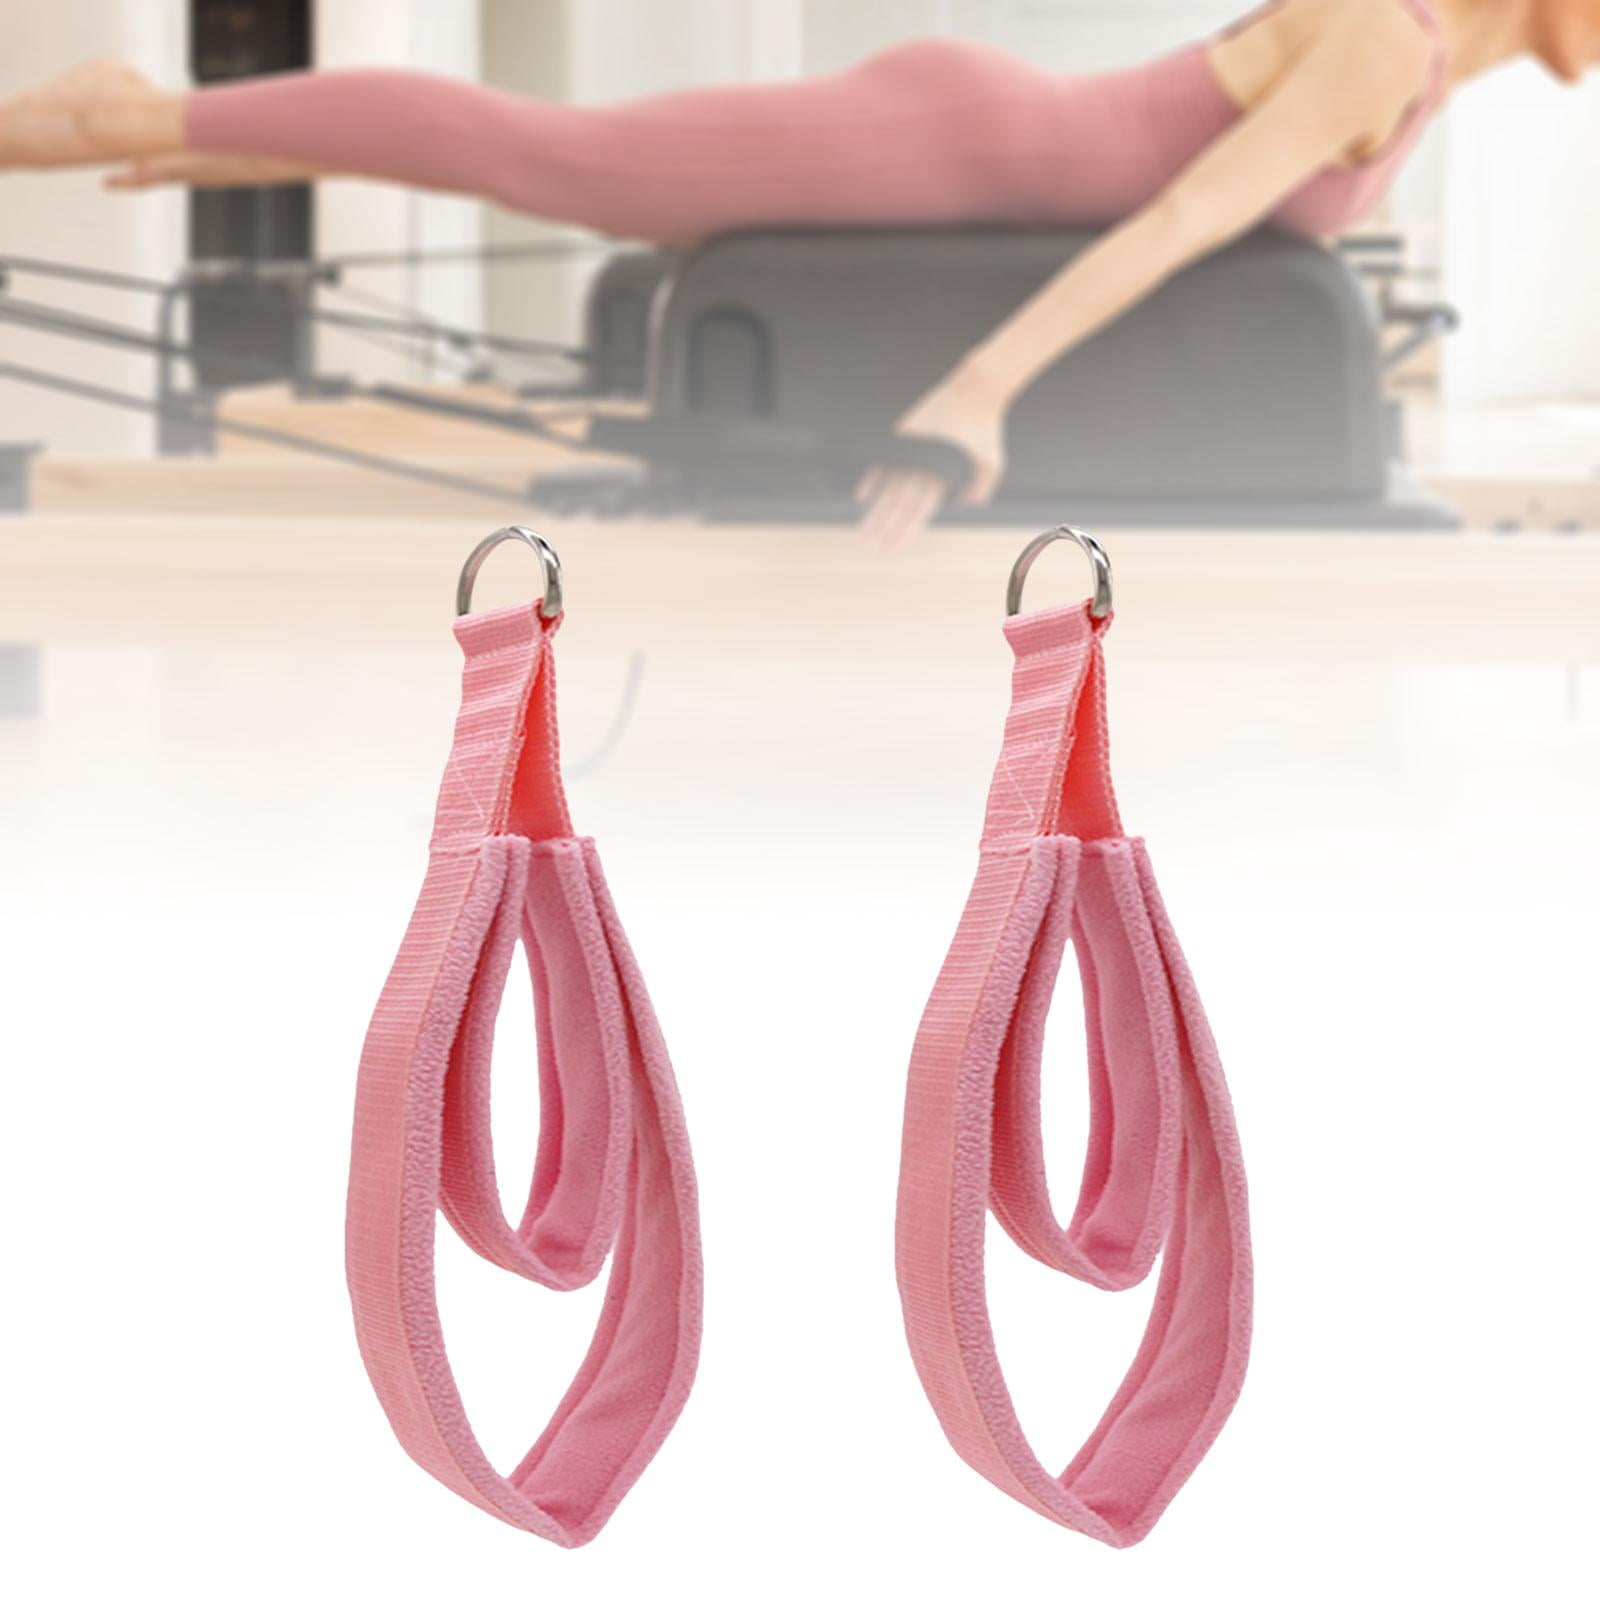 Pilates Reformer Replacement Straps - Double Loop – GripperzSocks